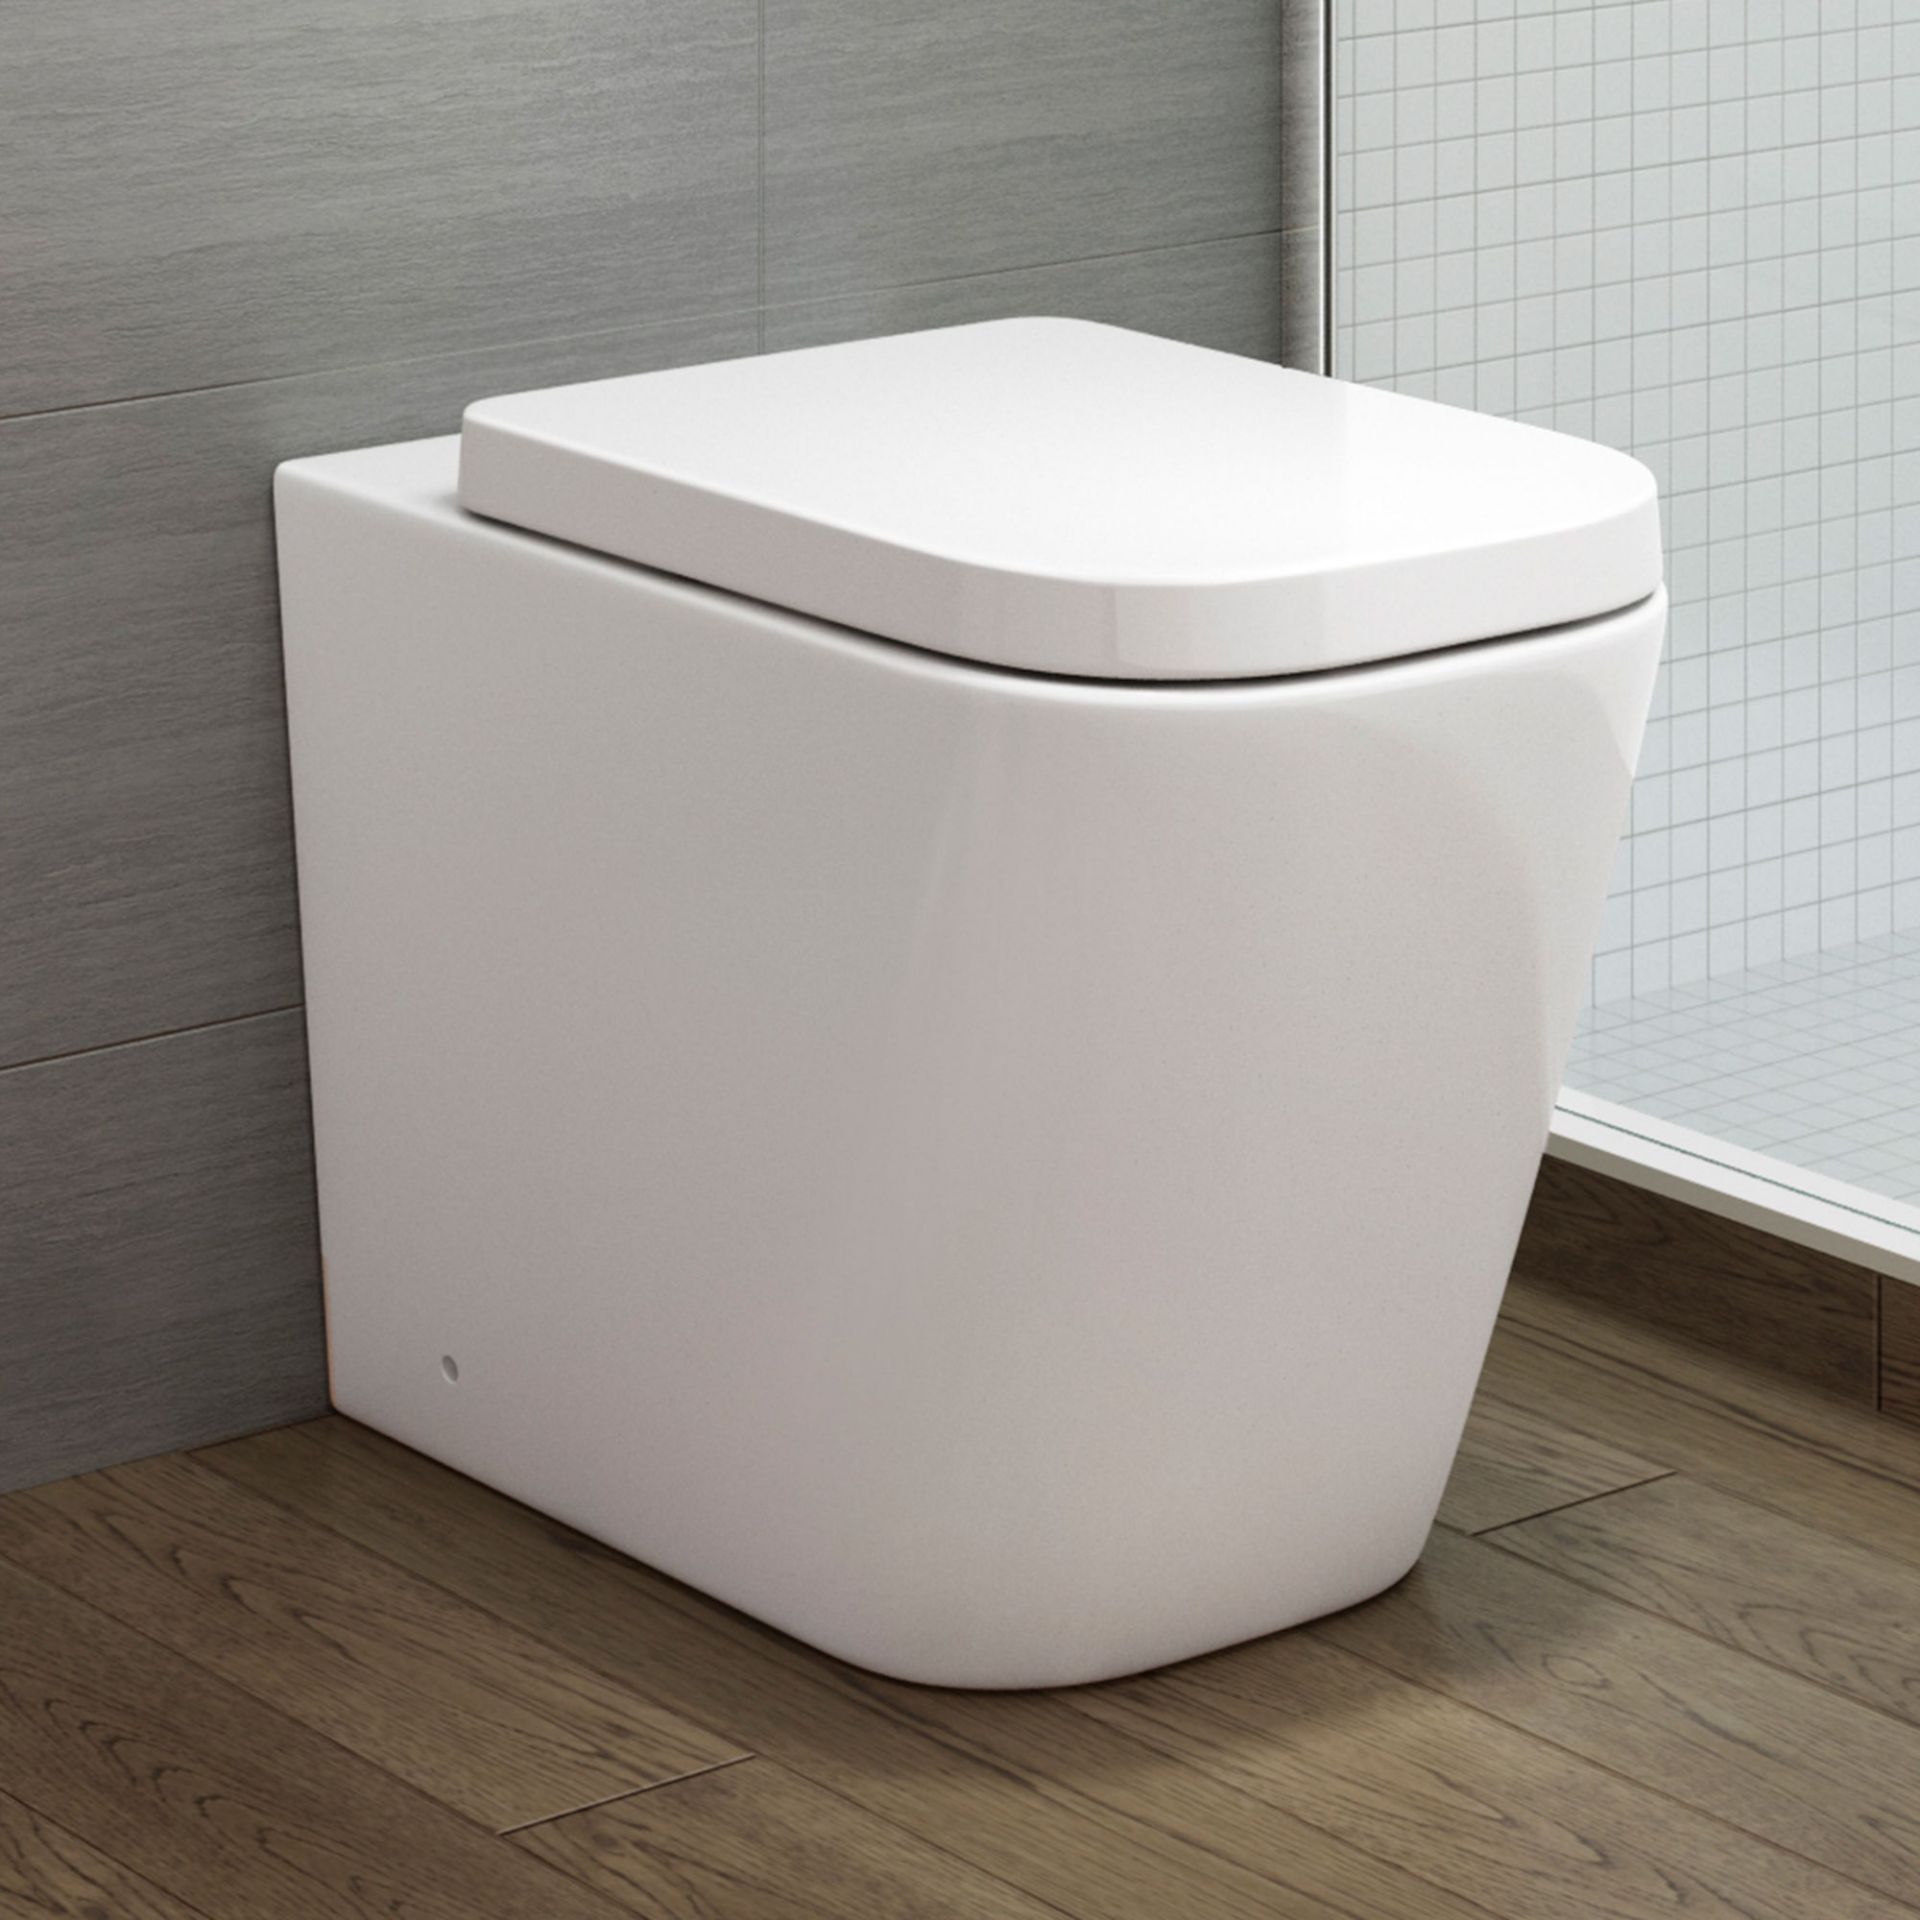 New Florence Rimless Back To Wall Toilet Inc Luxury Soft Close Seat Rimless Design Makes It Easy